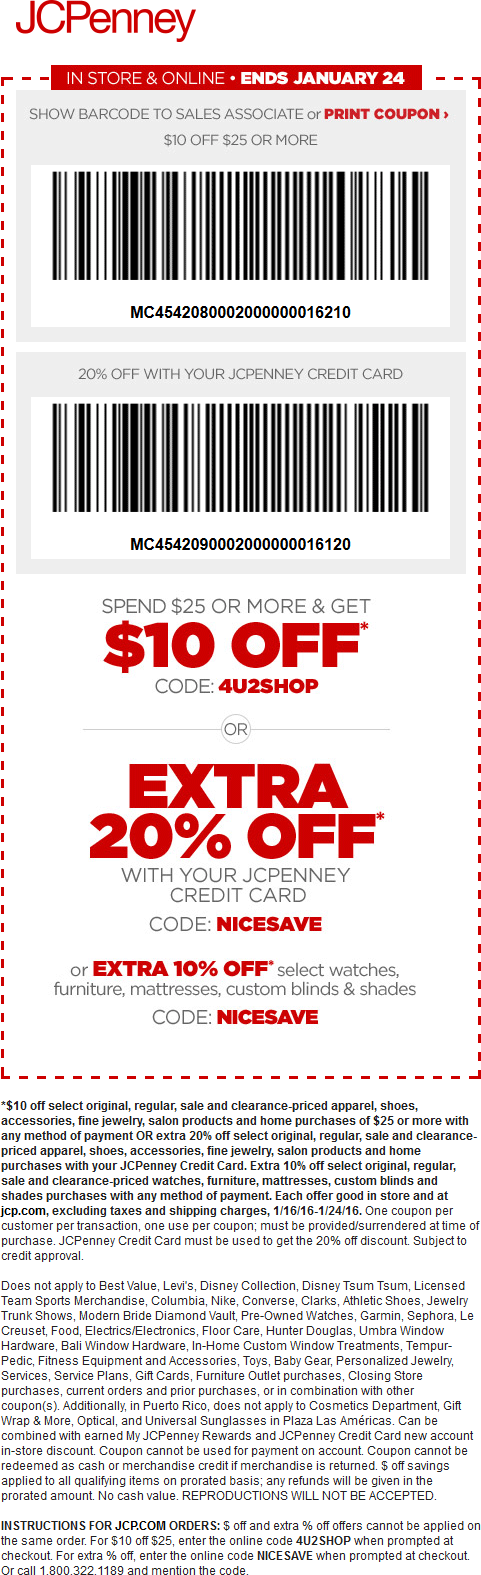 January 2016 16 Jcpenney Coupon 9745 